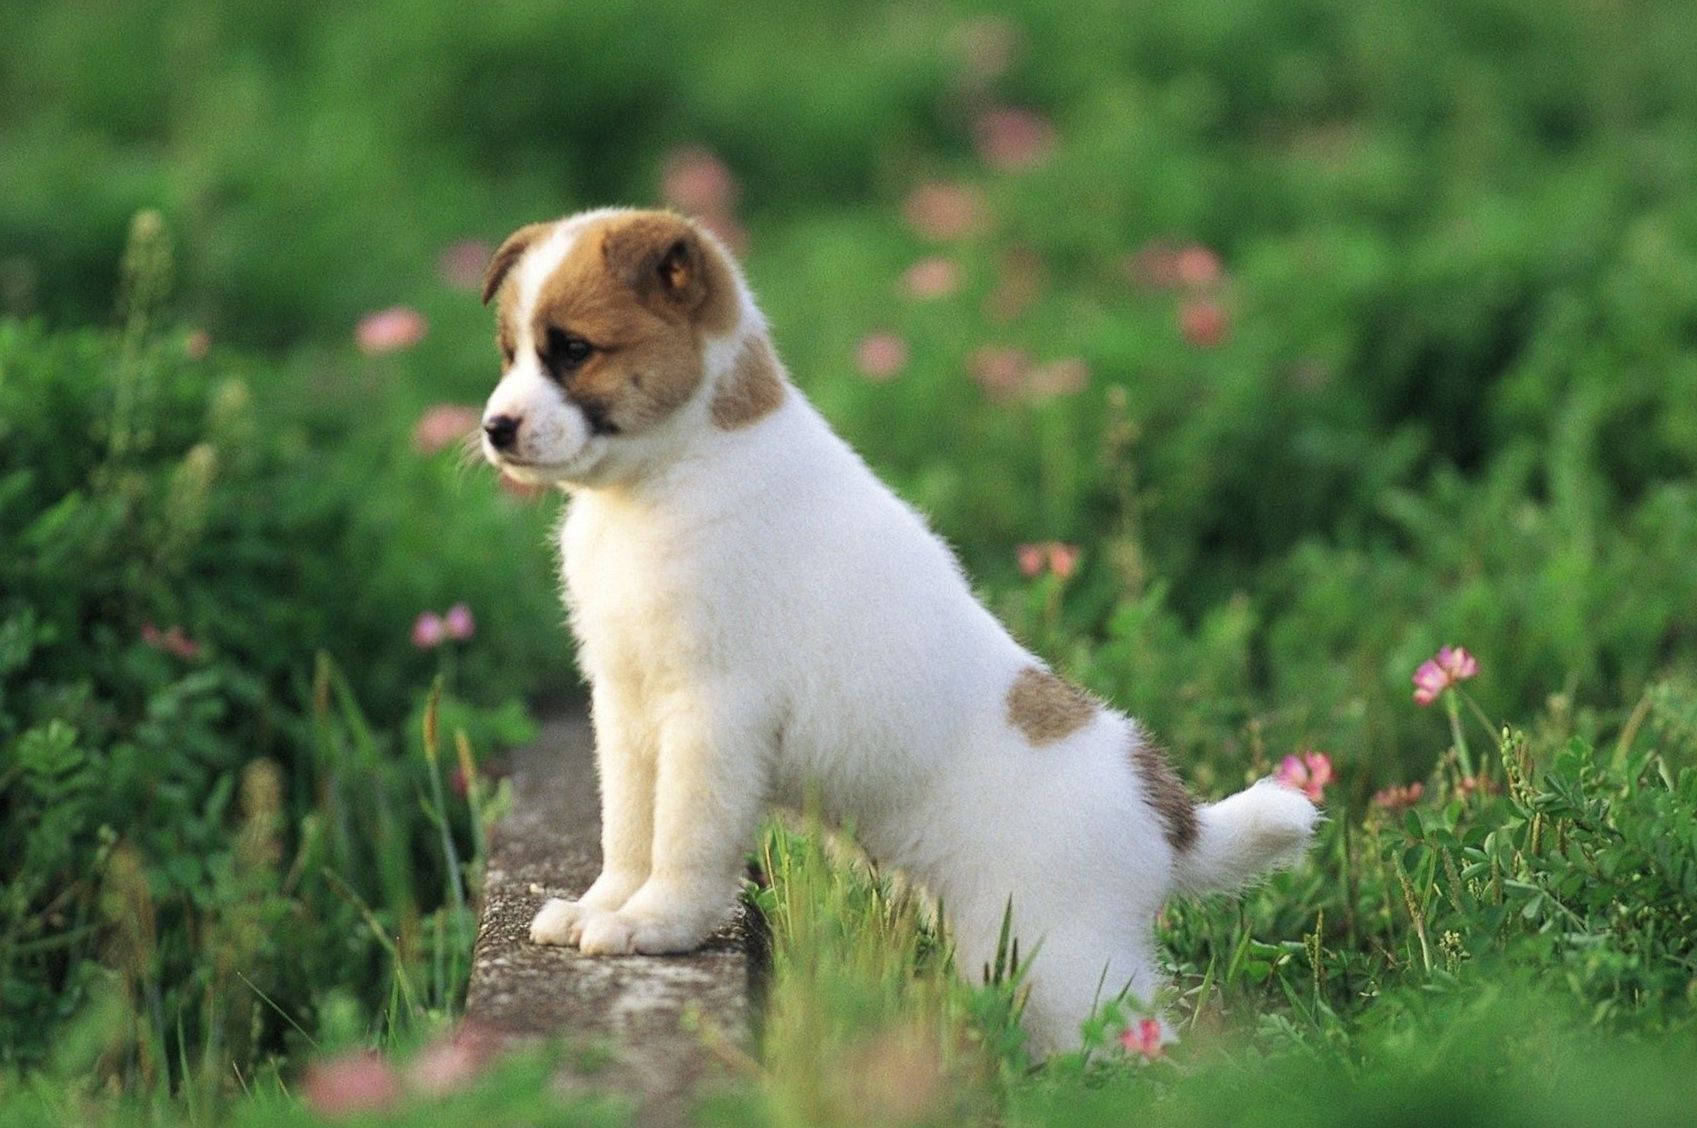 Puppy Dog On Grass With Pink Flowers Background